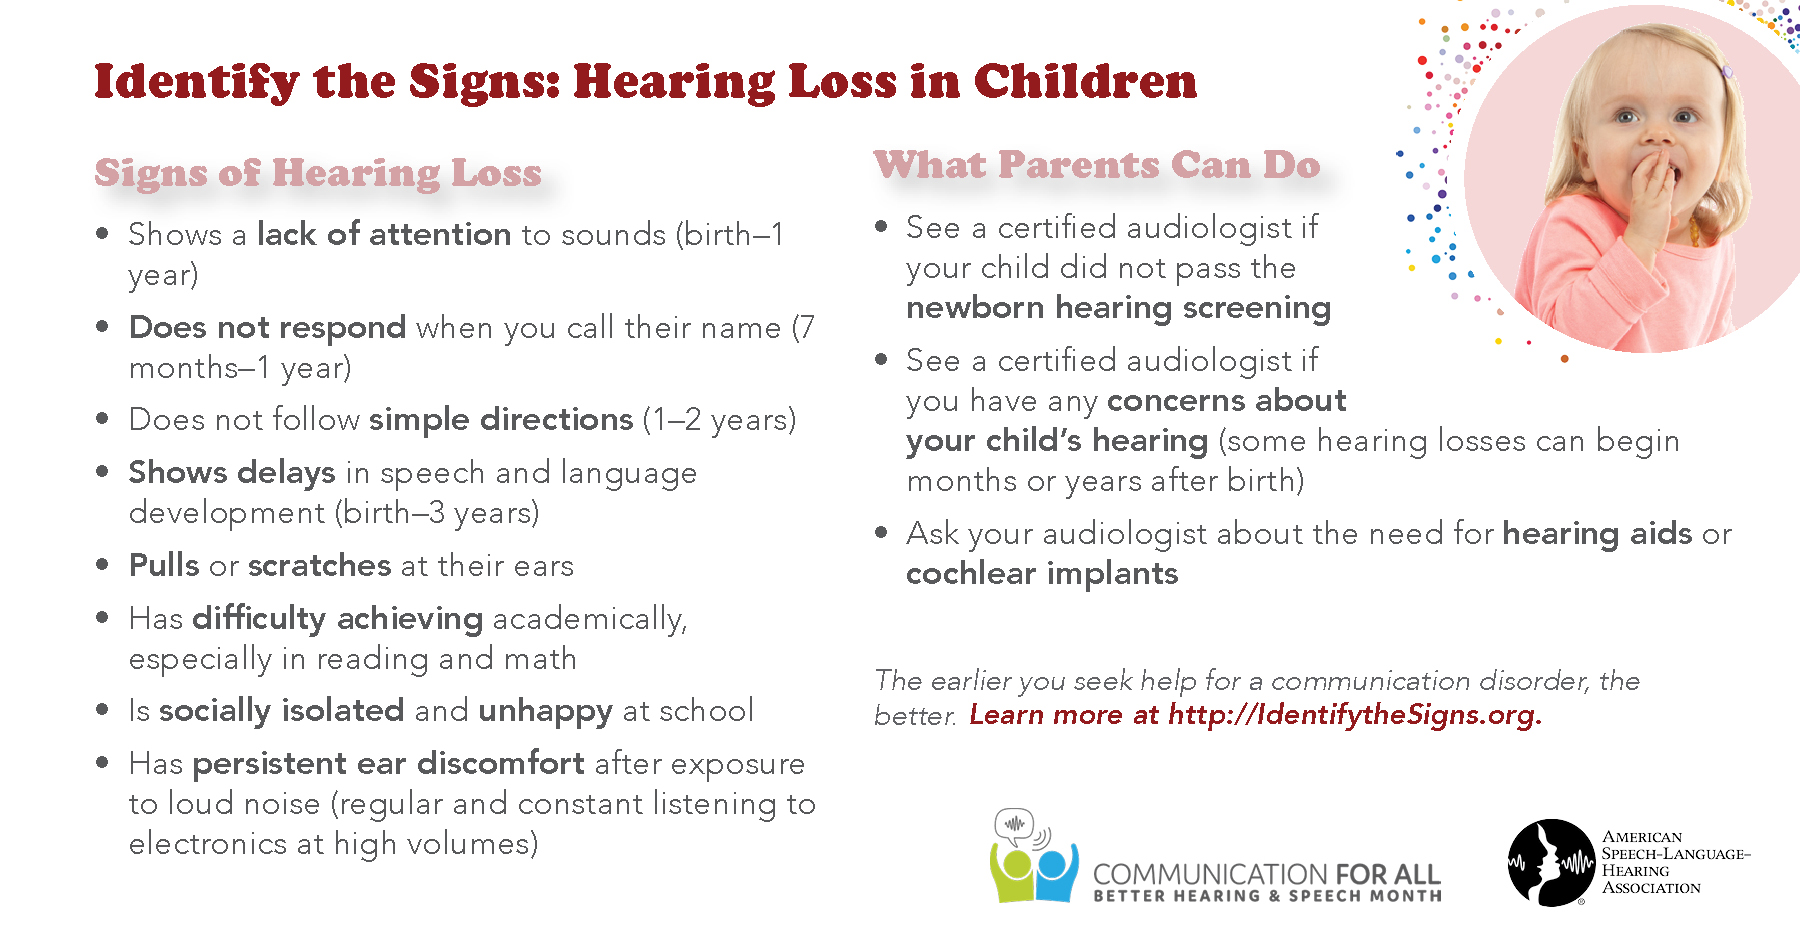 Signs of Hearing Loss in Children